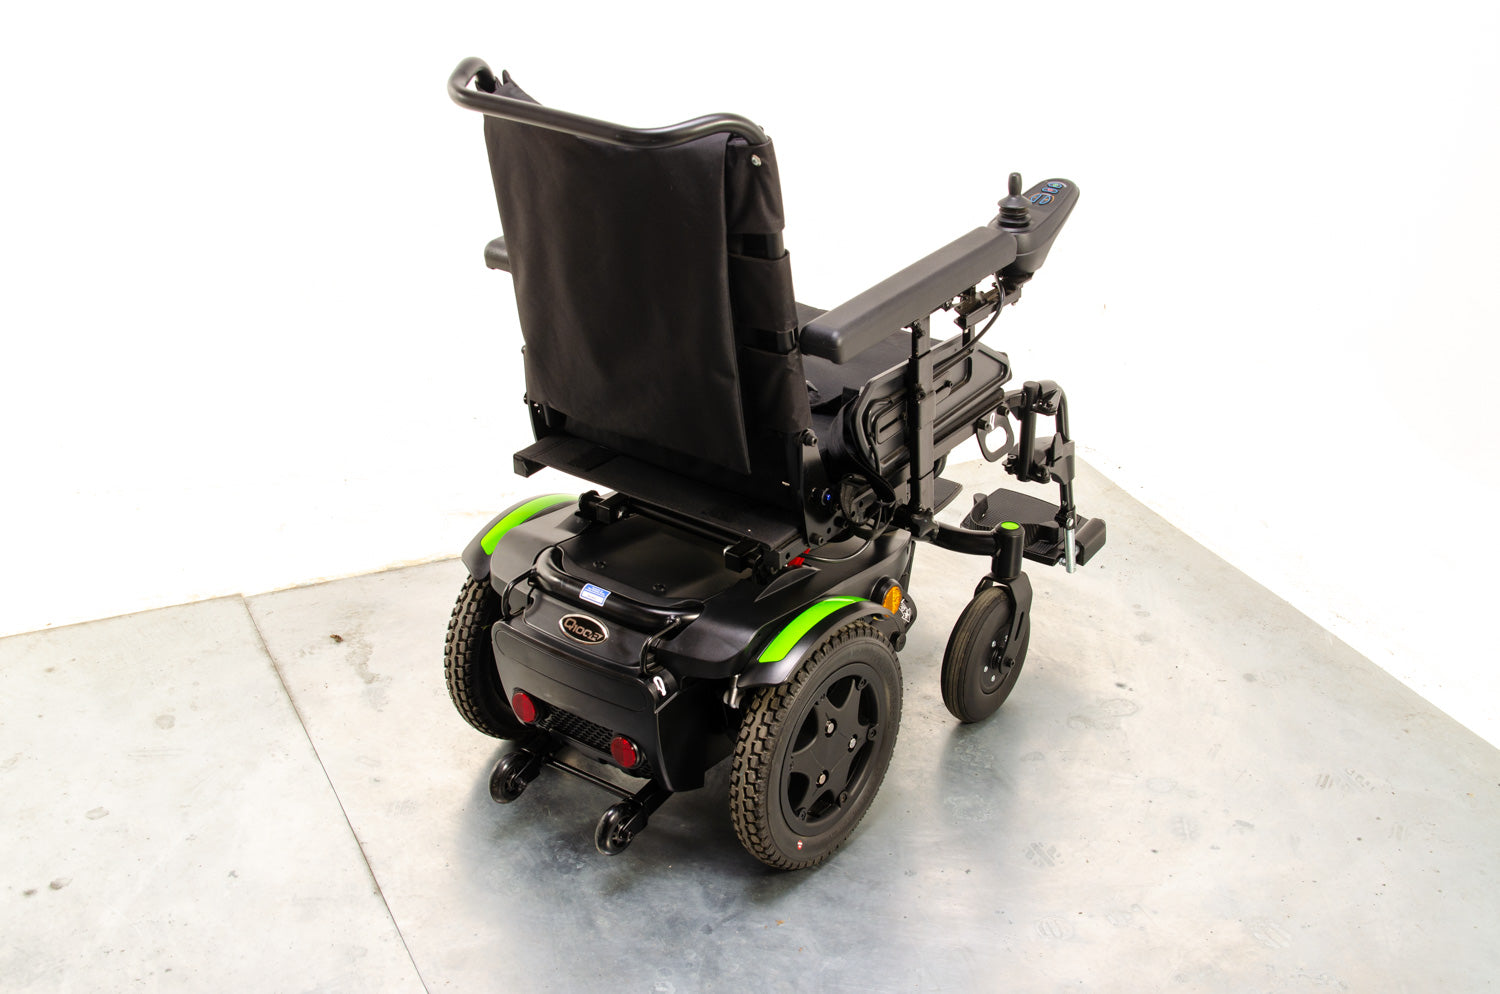 2022 Quickie Q100 R Compact Indoor Outdoor Powerchair Wheelchair Sunrise Medical 03682